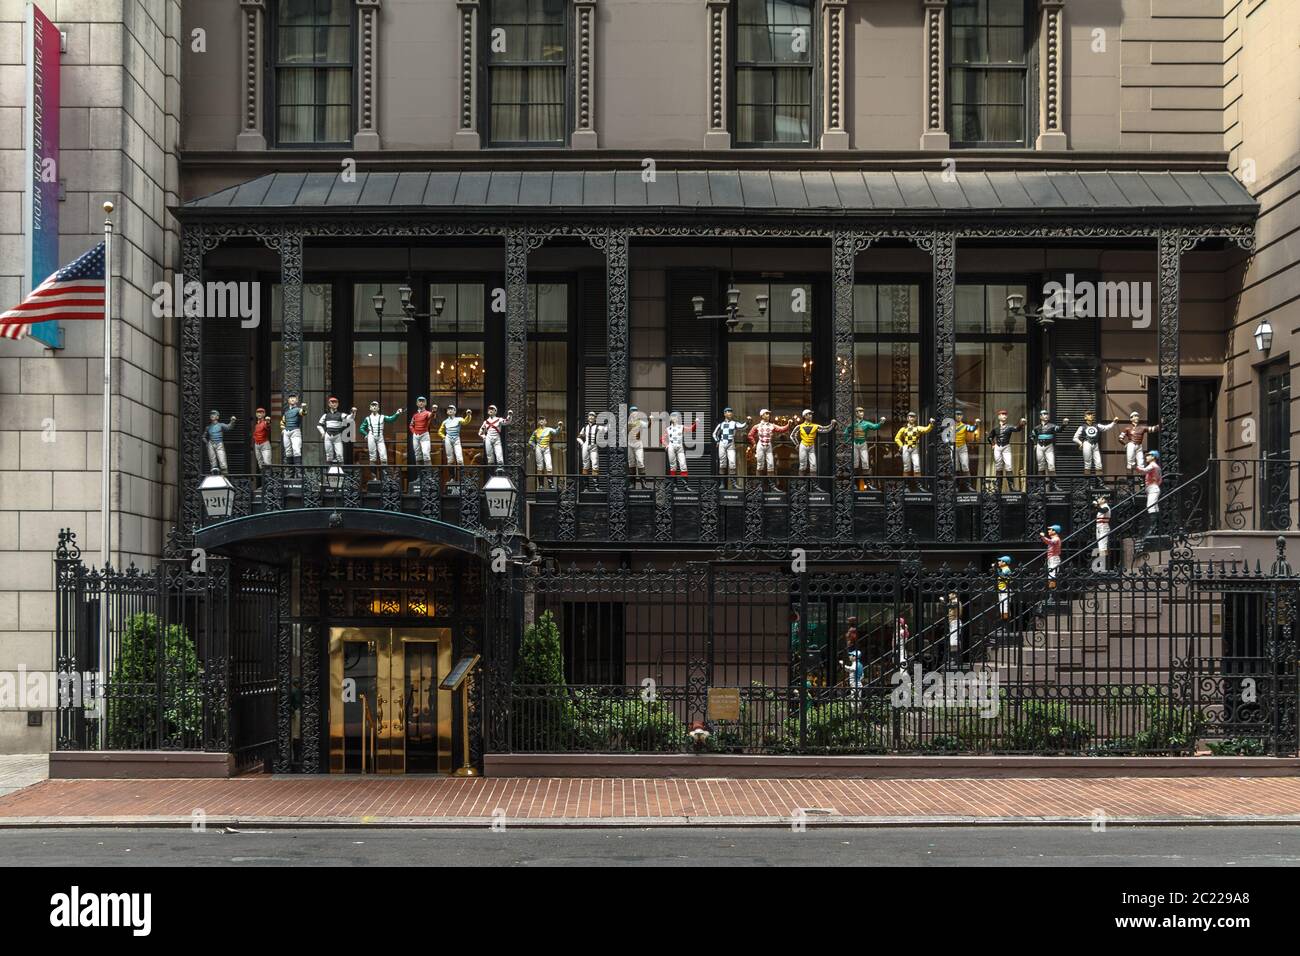 Jockey statues on the cast iron terrace facade of the 21 Club in Manhattan Stock Photo